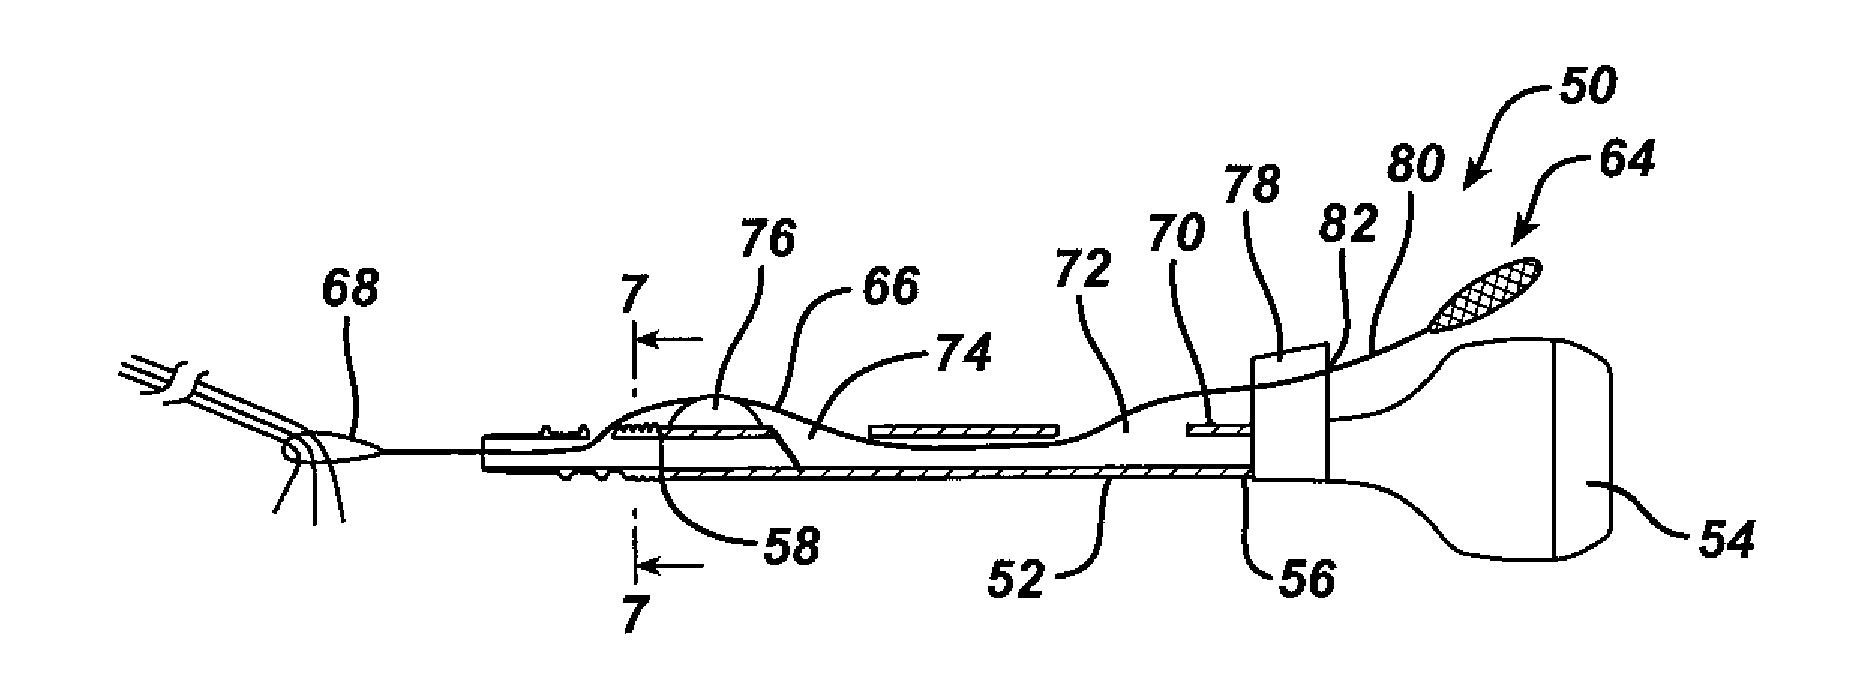 Knotless suture anchor with unthreaded nose